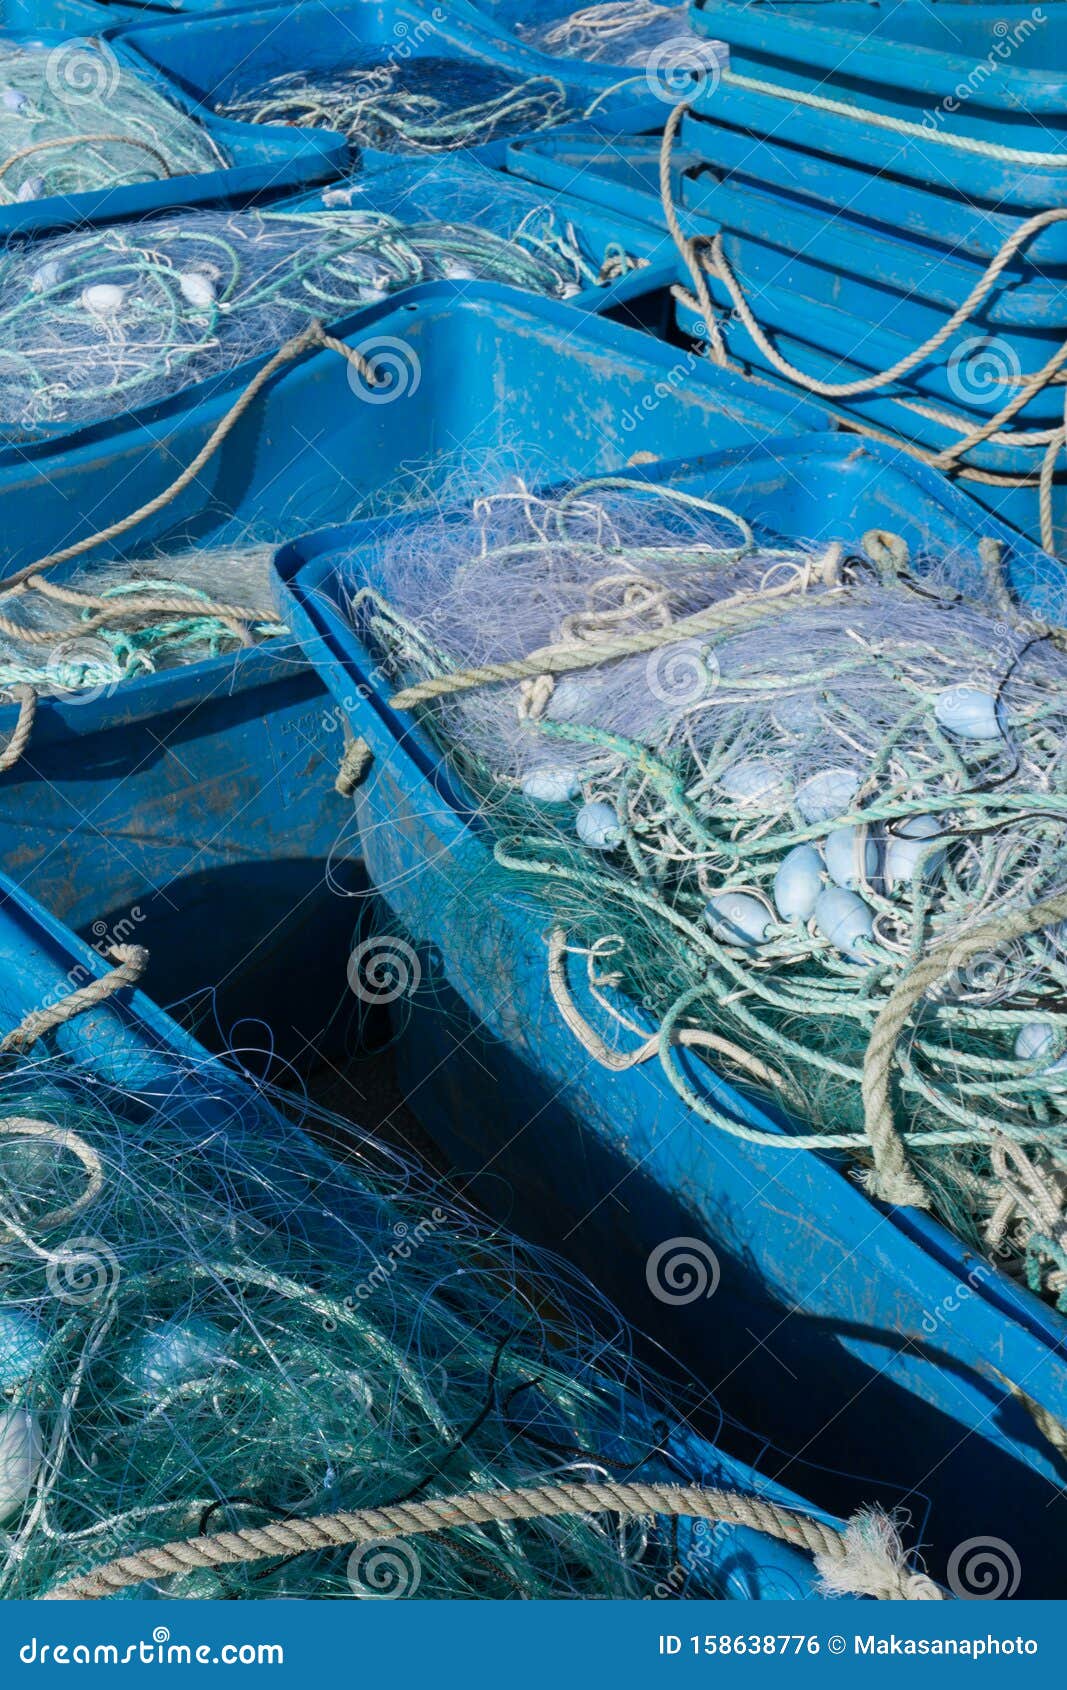 https://thumbs.dreamstime.com/z/large-plastic-tubs-filled-industrial-size-fishing-trawling-nets-used-offshore-fishing-industry-detail-view-158638776.jpg